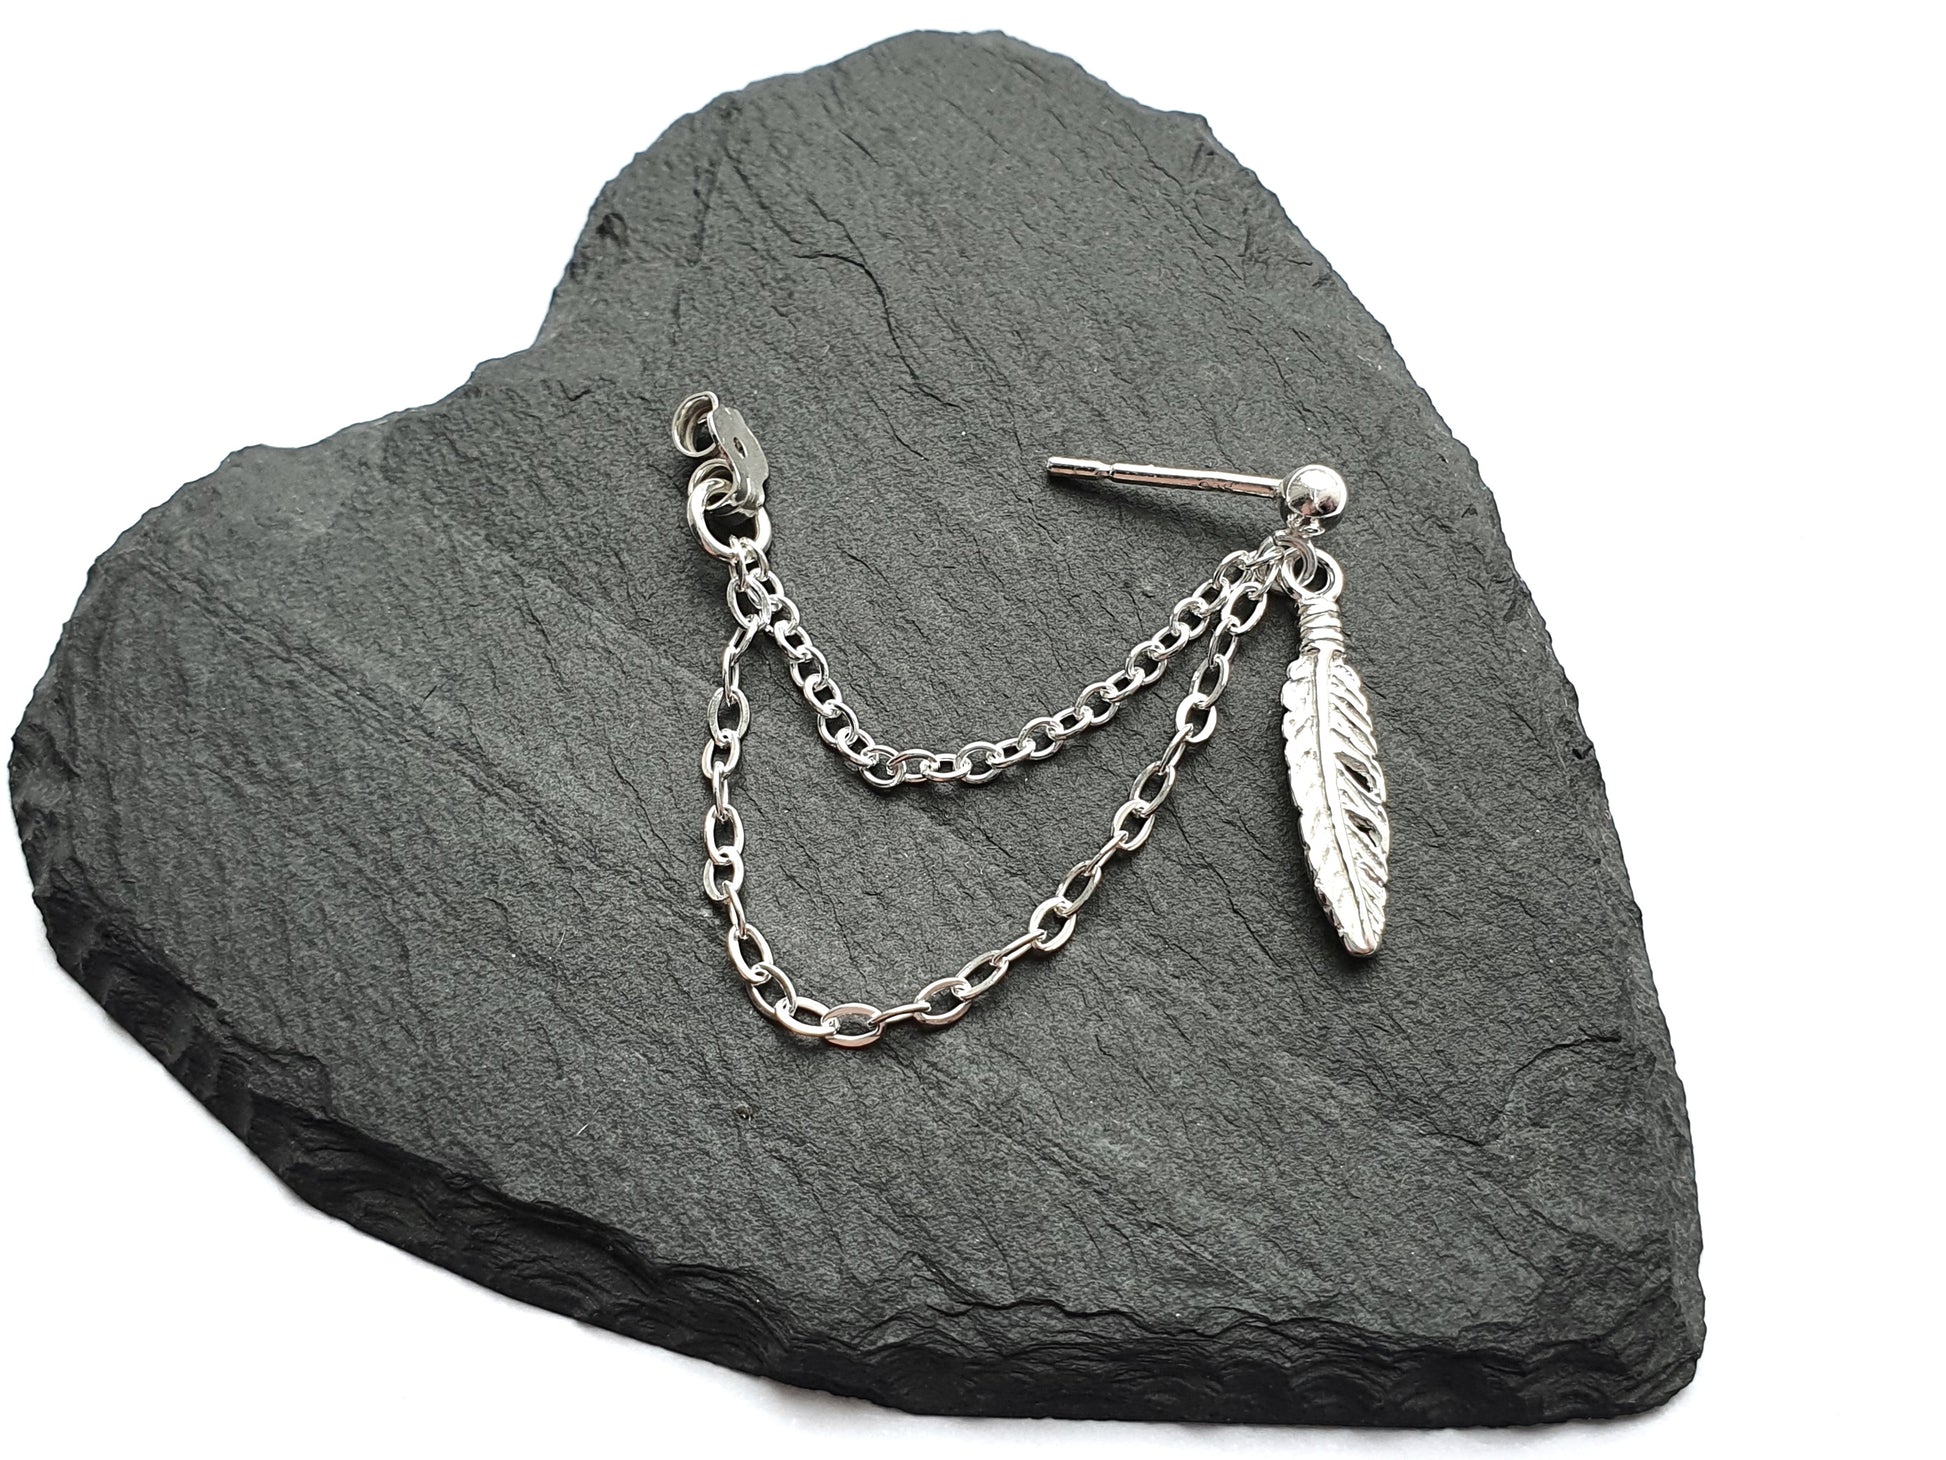 Sterling silver chain earring with feather